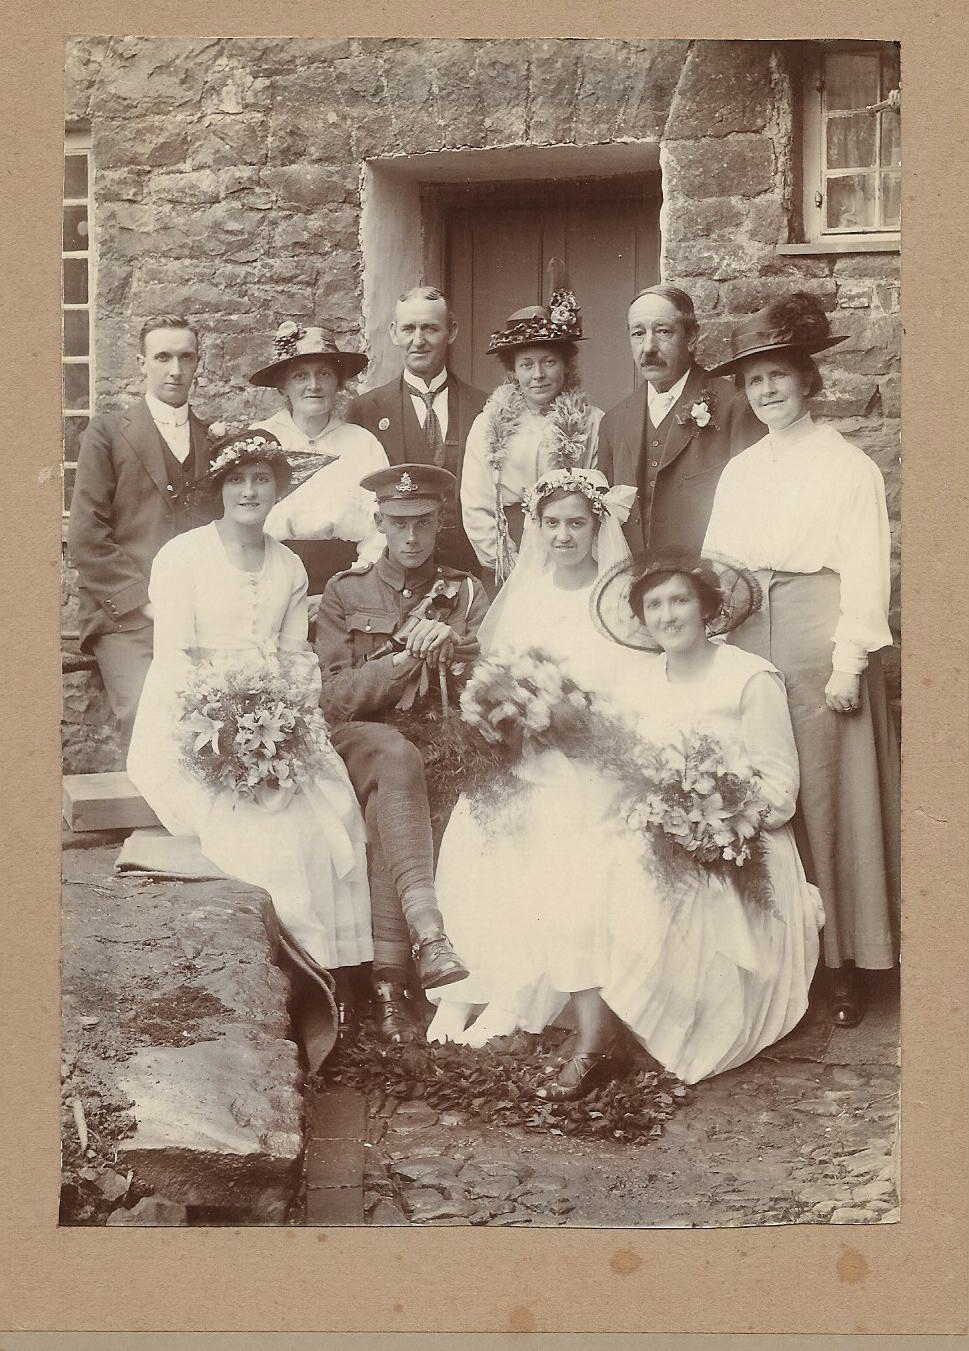 Ernest and Eveline Mummery left rear and seated (from Ancestry)